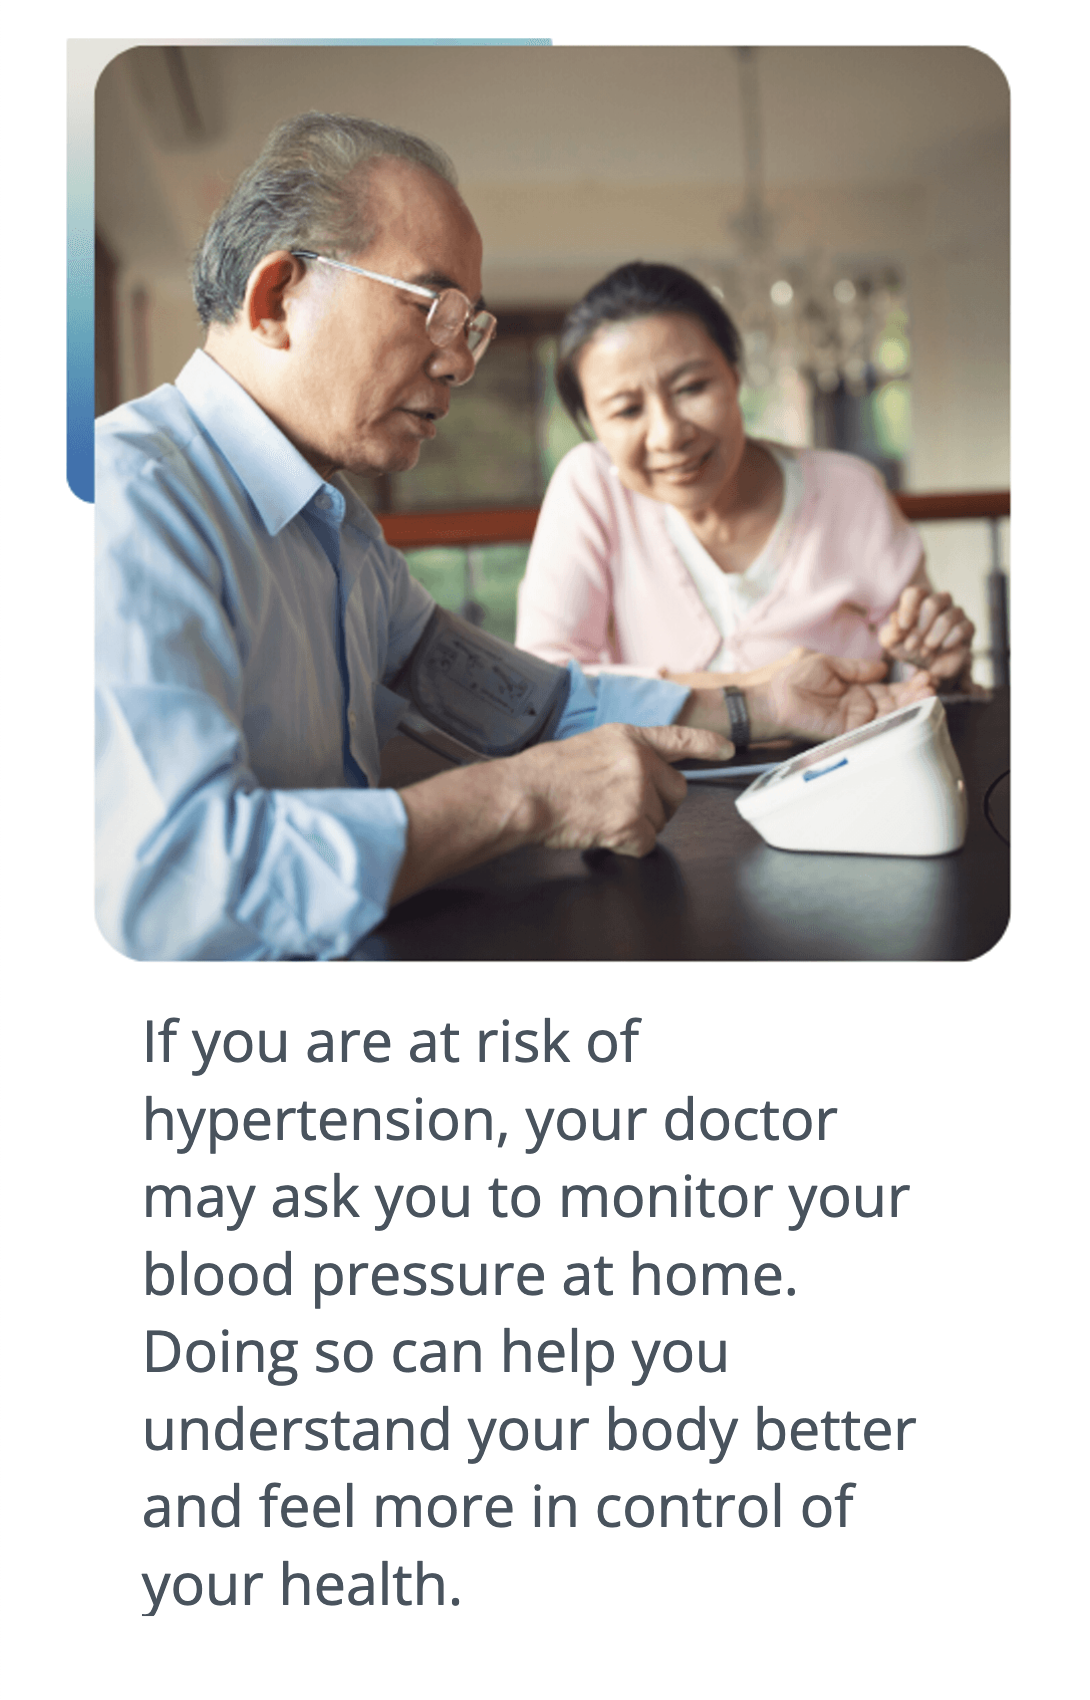 Screenshot from how do I measure my blood pressure? course - card 3